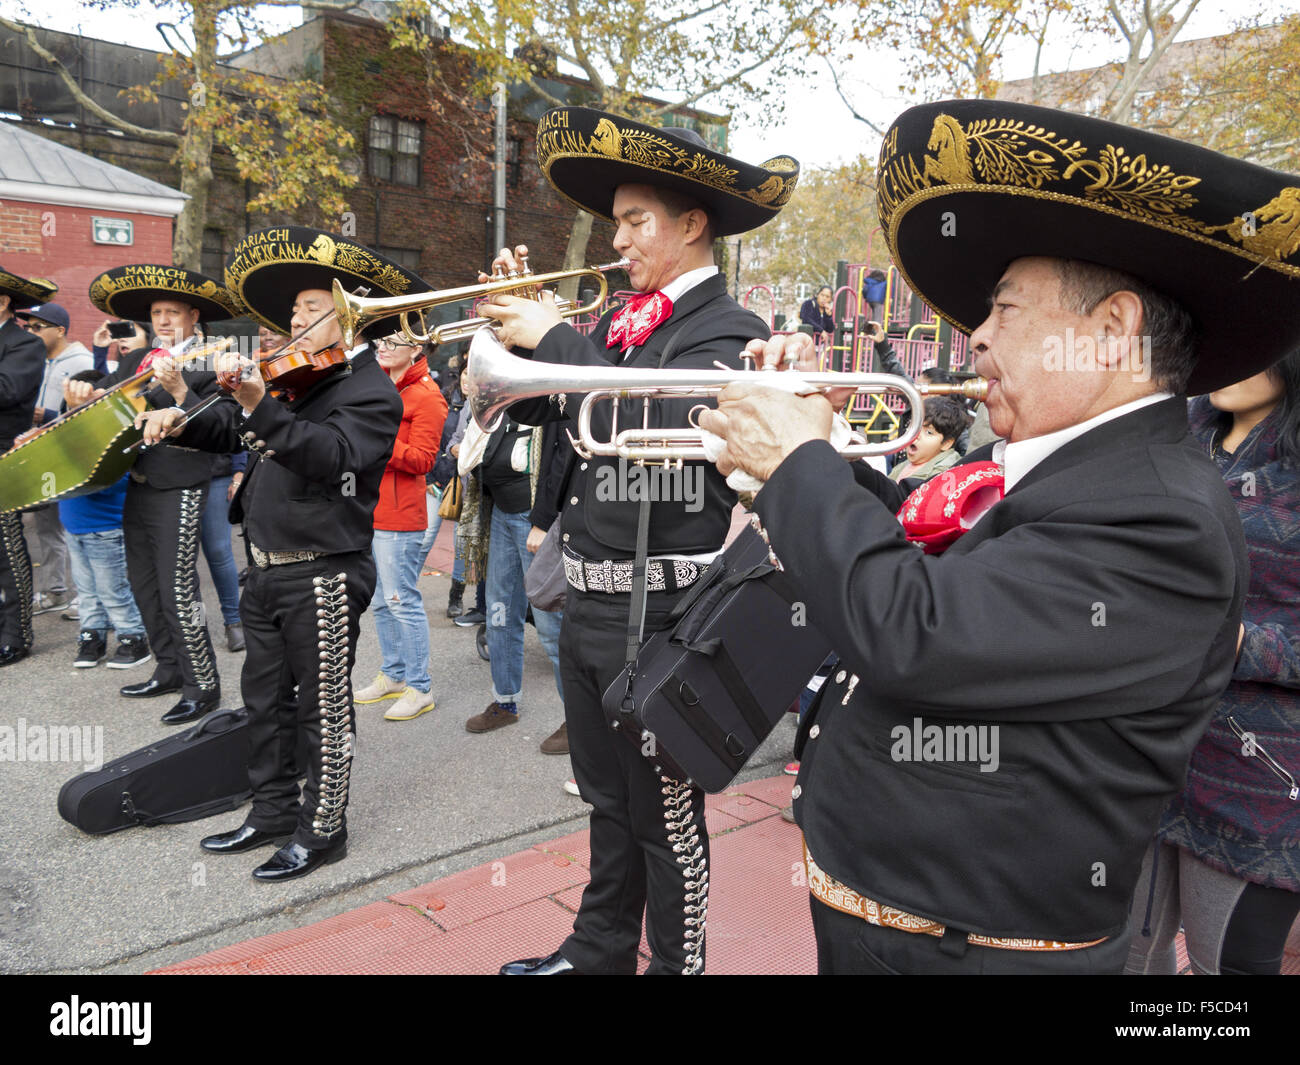 Mariachi players at Day of the Dead Festival in the Kensington section of Brooklyn, NY, Nov.1, 2015. Stock Photo